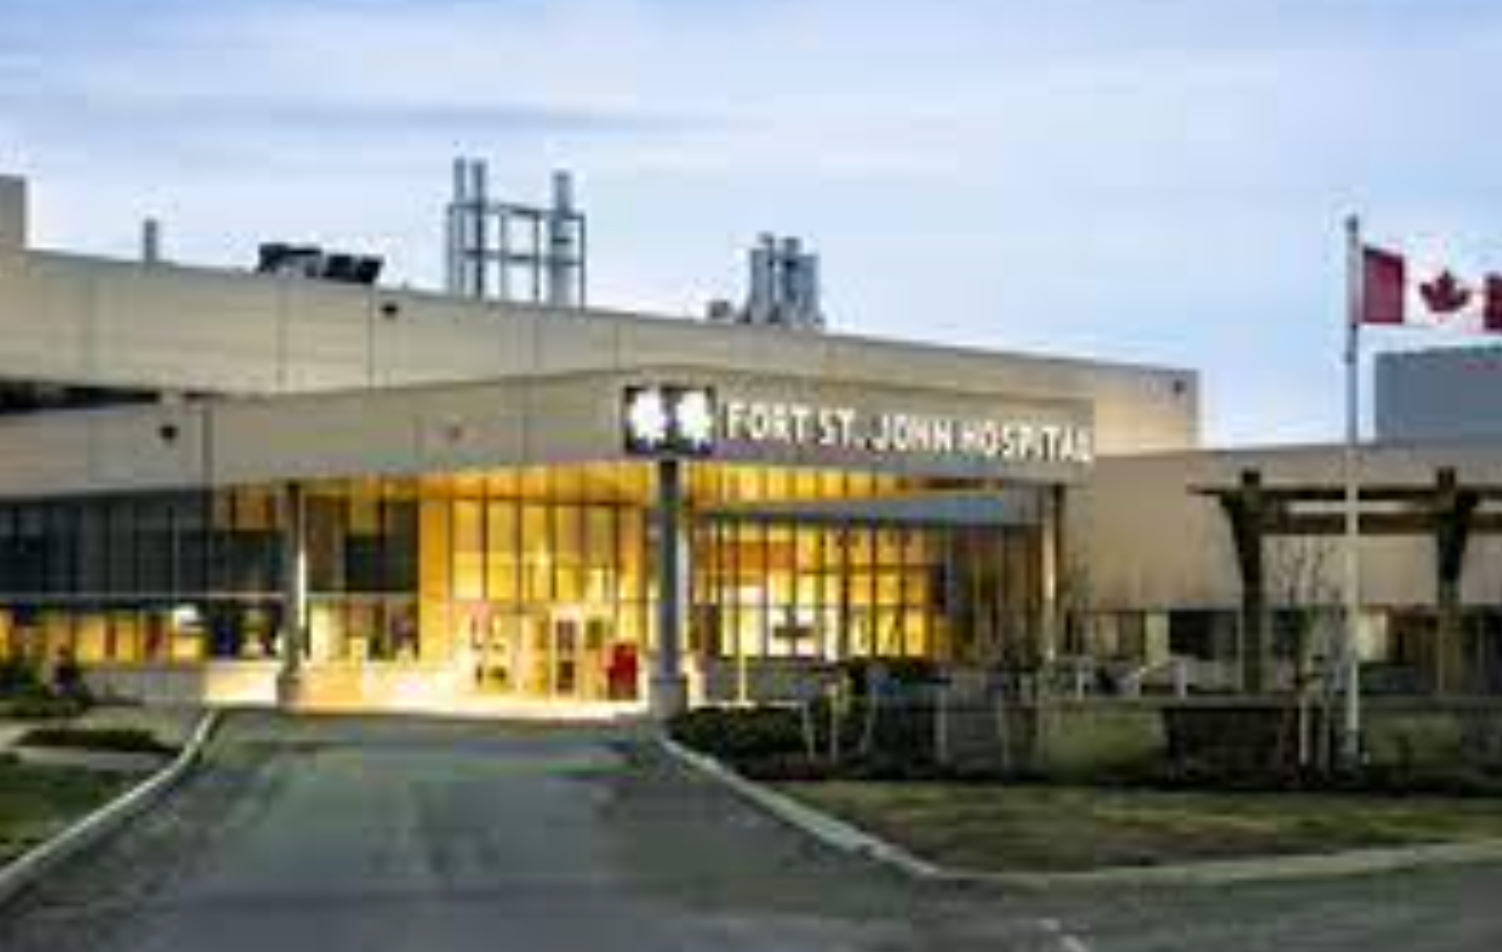 The Fort St John Hospital Foundation, which is overseen by Canada’s Northern Health Authority